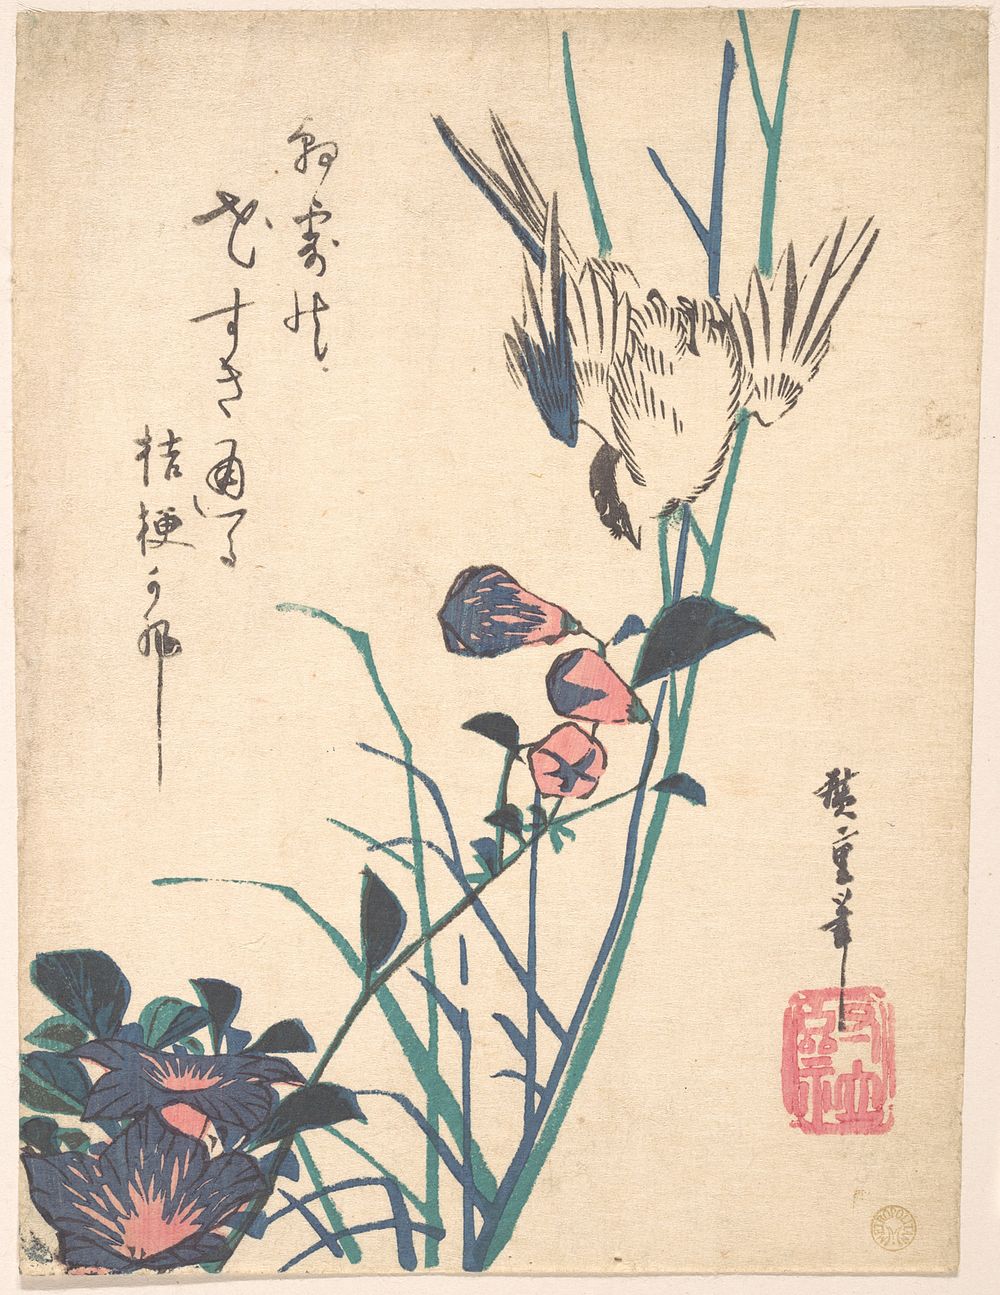 Large-flowered Flat Bill and Sparrow. Original public domain image from the MET museum.